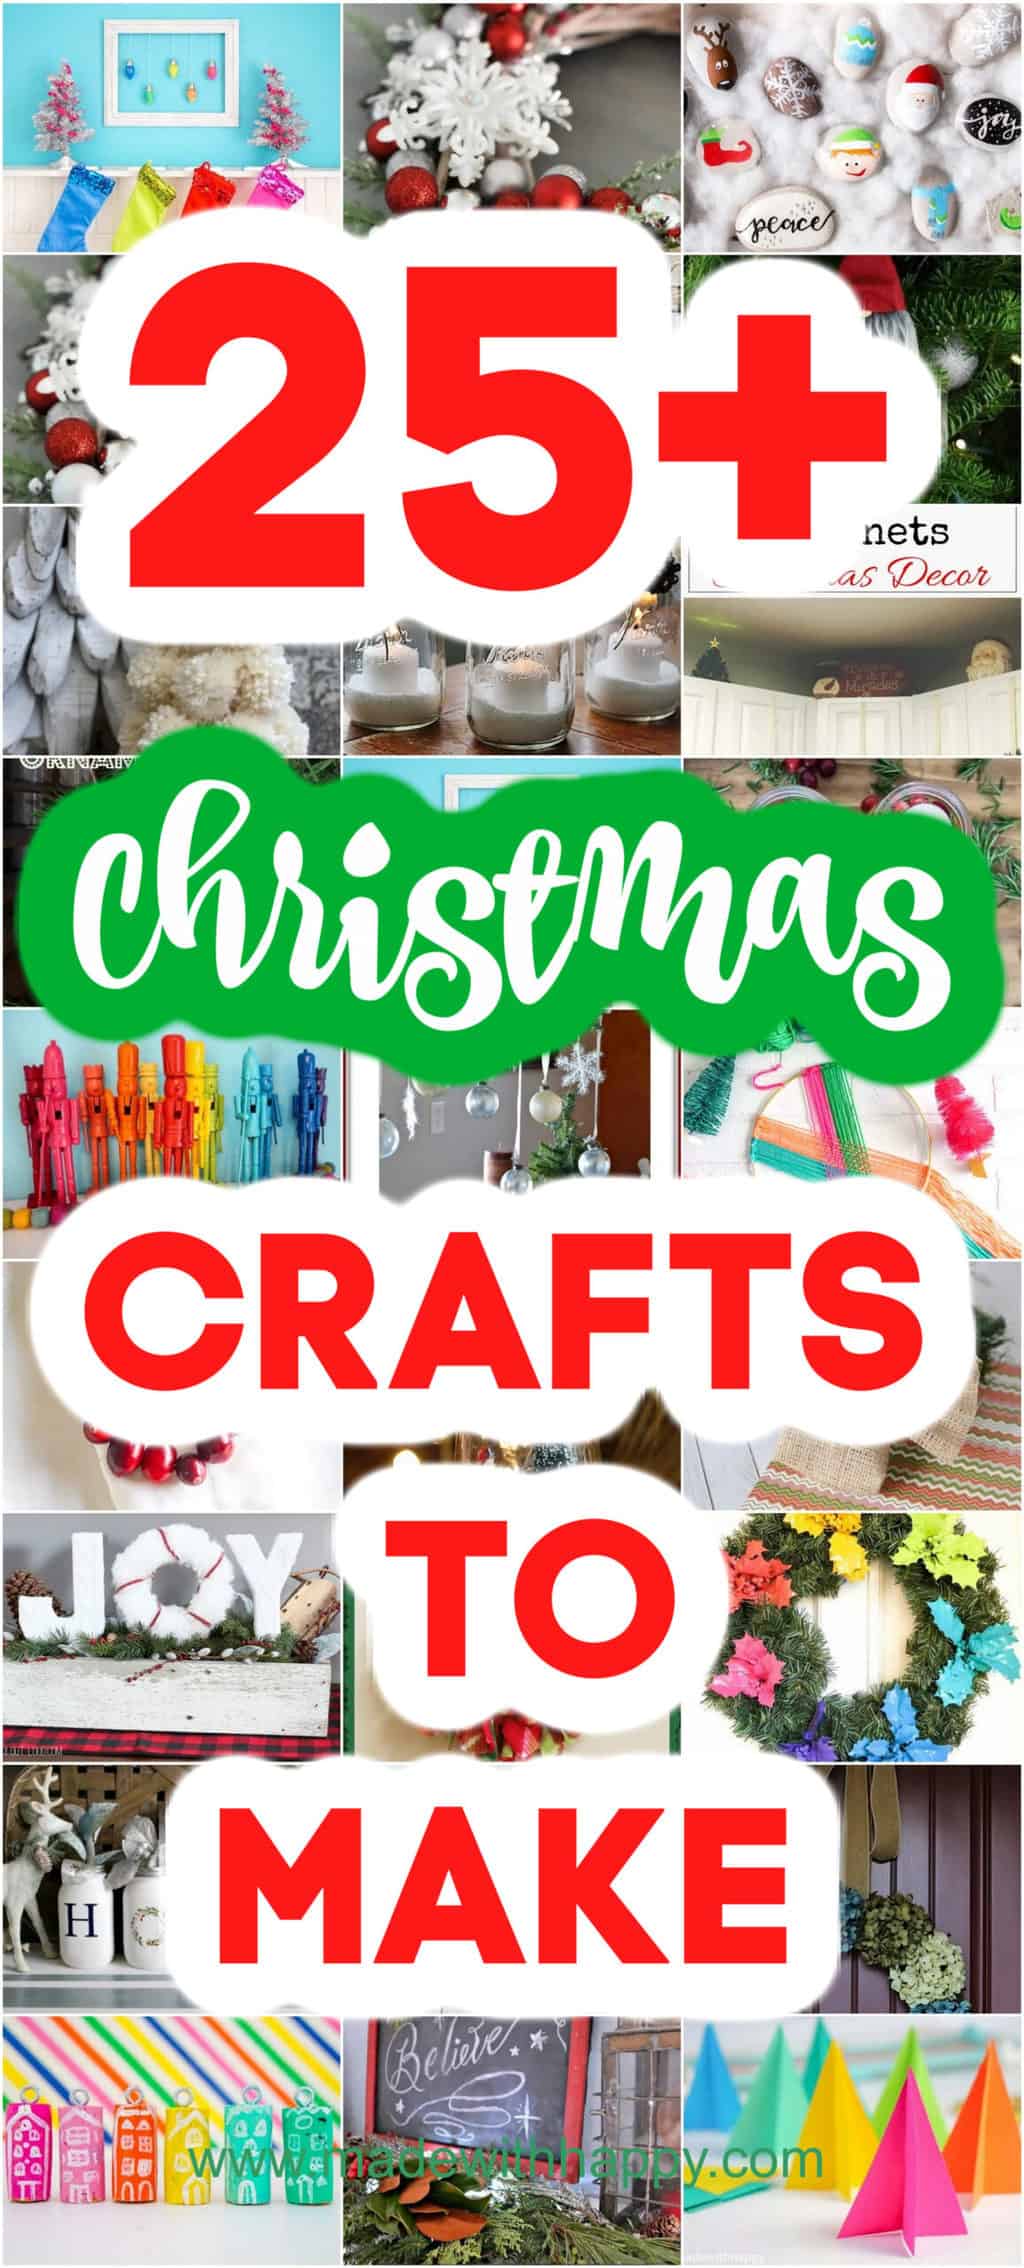 December Crafts For Kids - Crafts, Art Projects, Printables and Games!